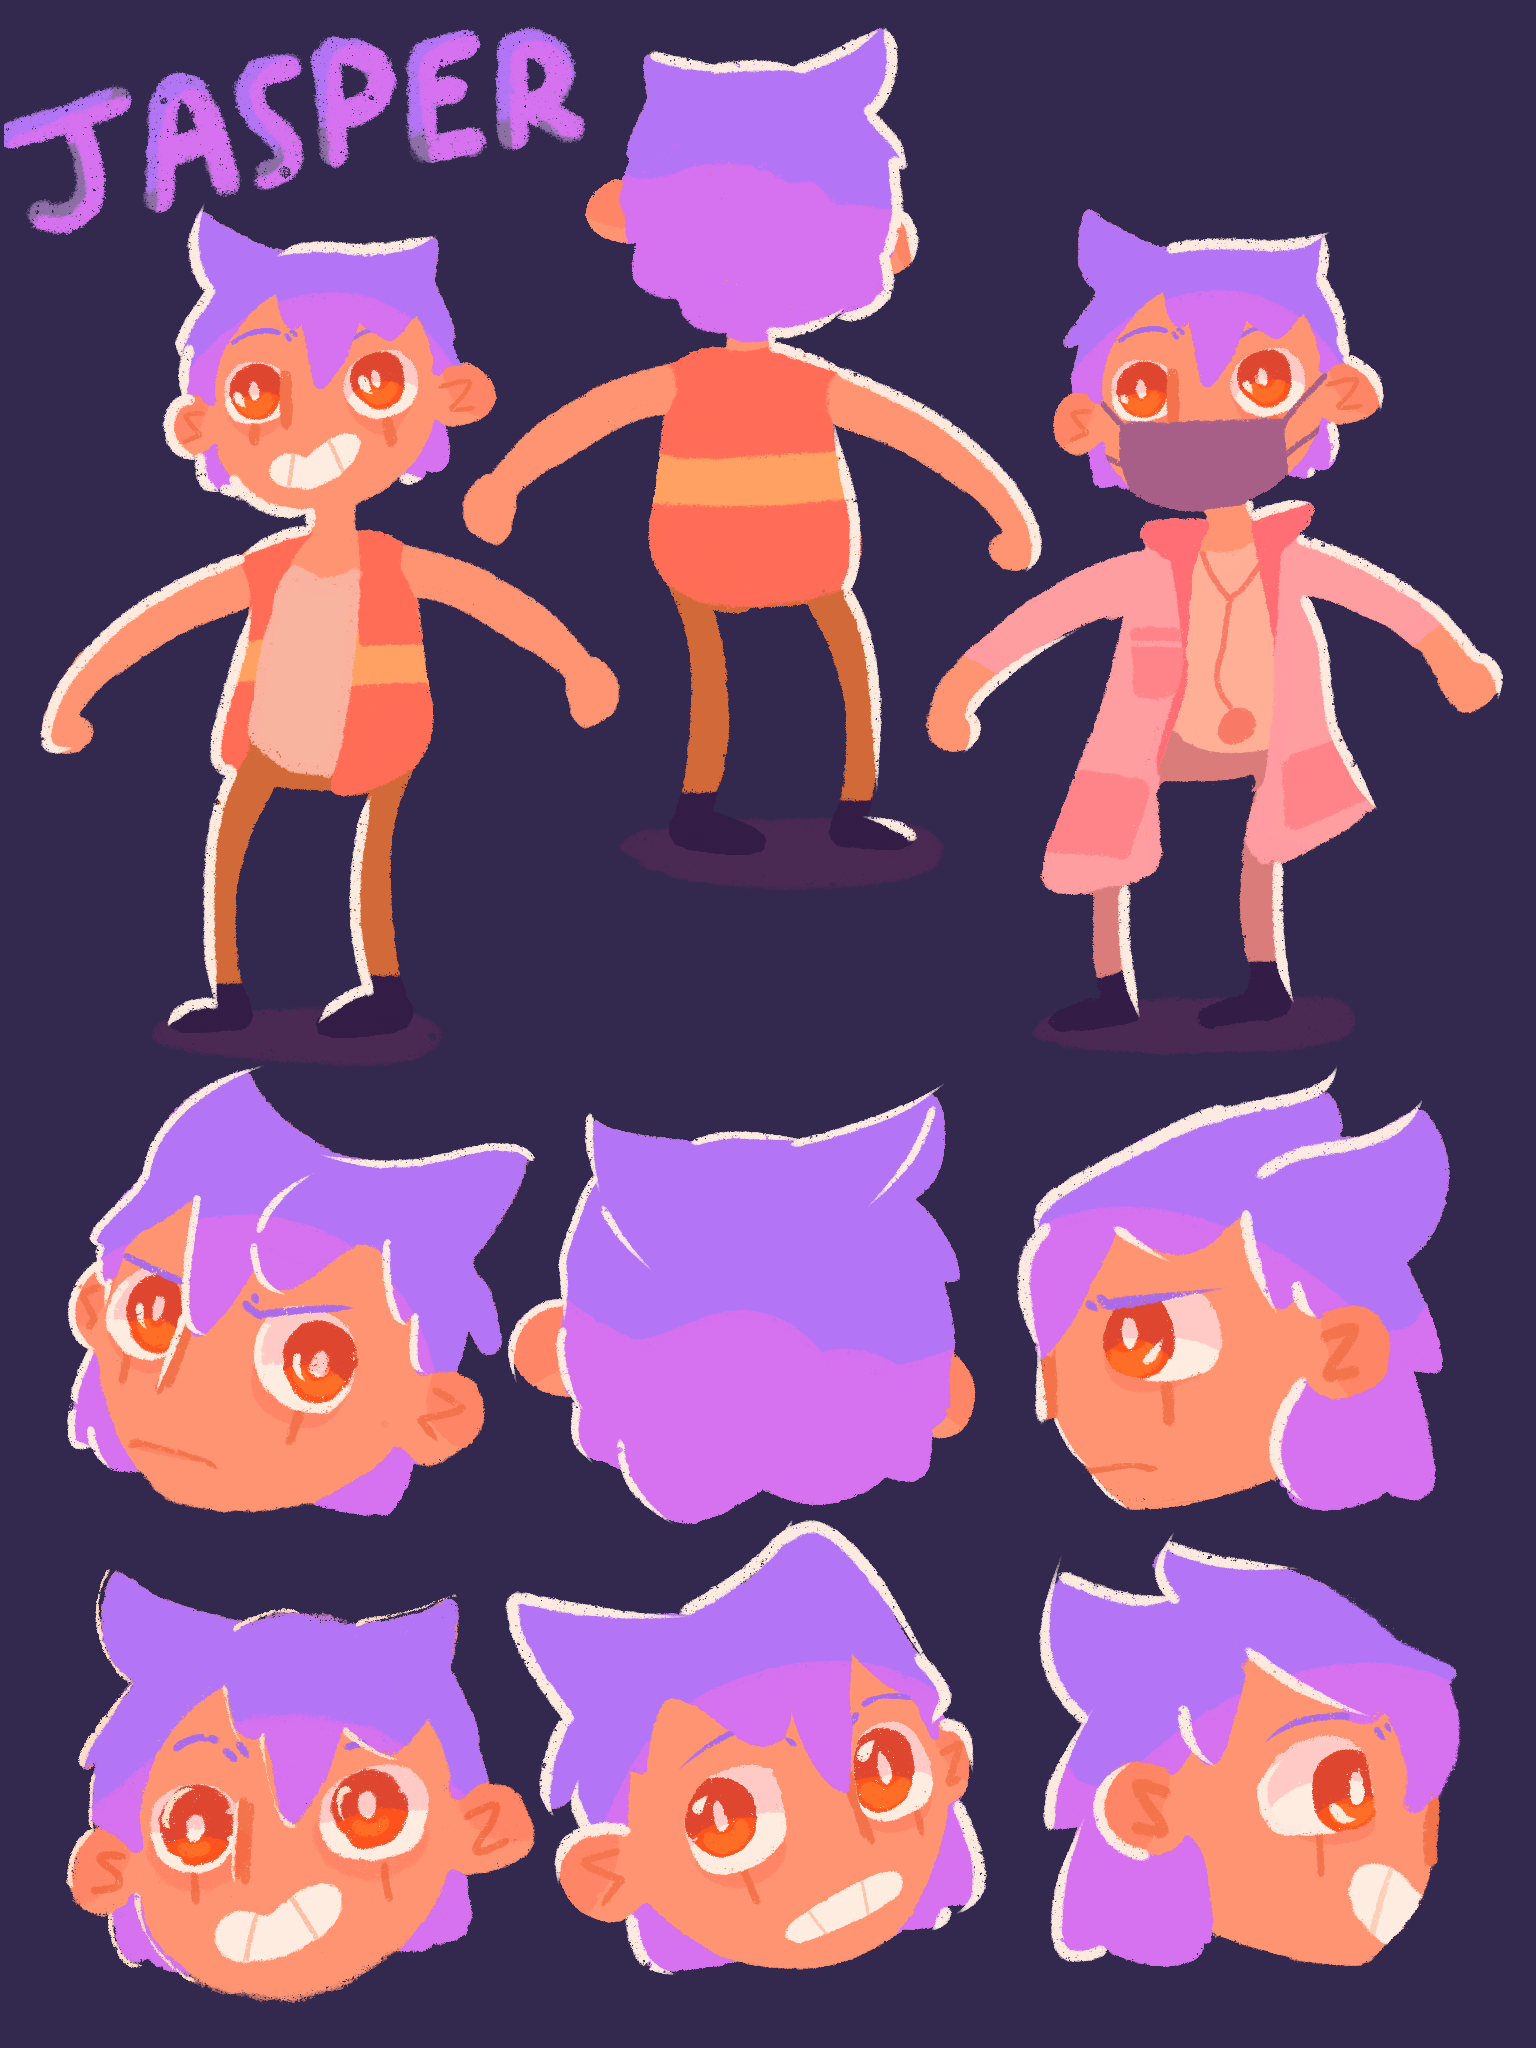 An illustrated work by Adam McIntosh showing character designs in soft purple and orange pastel tones.